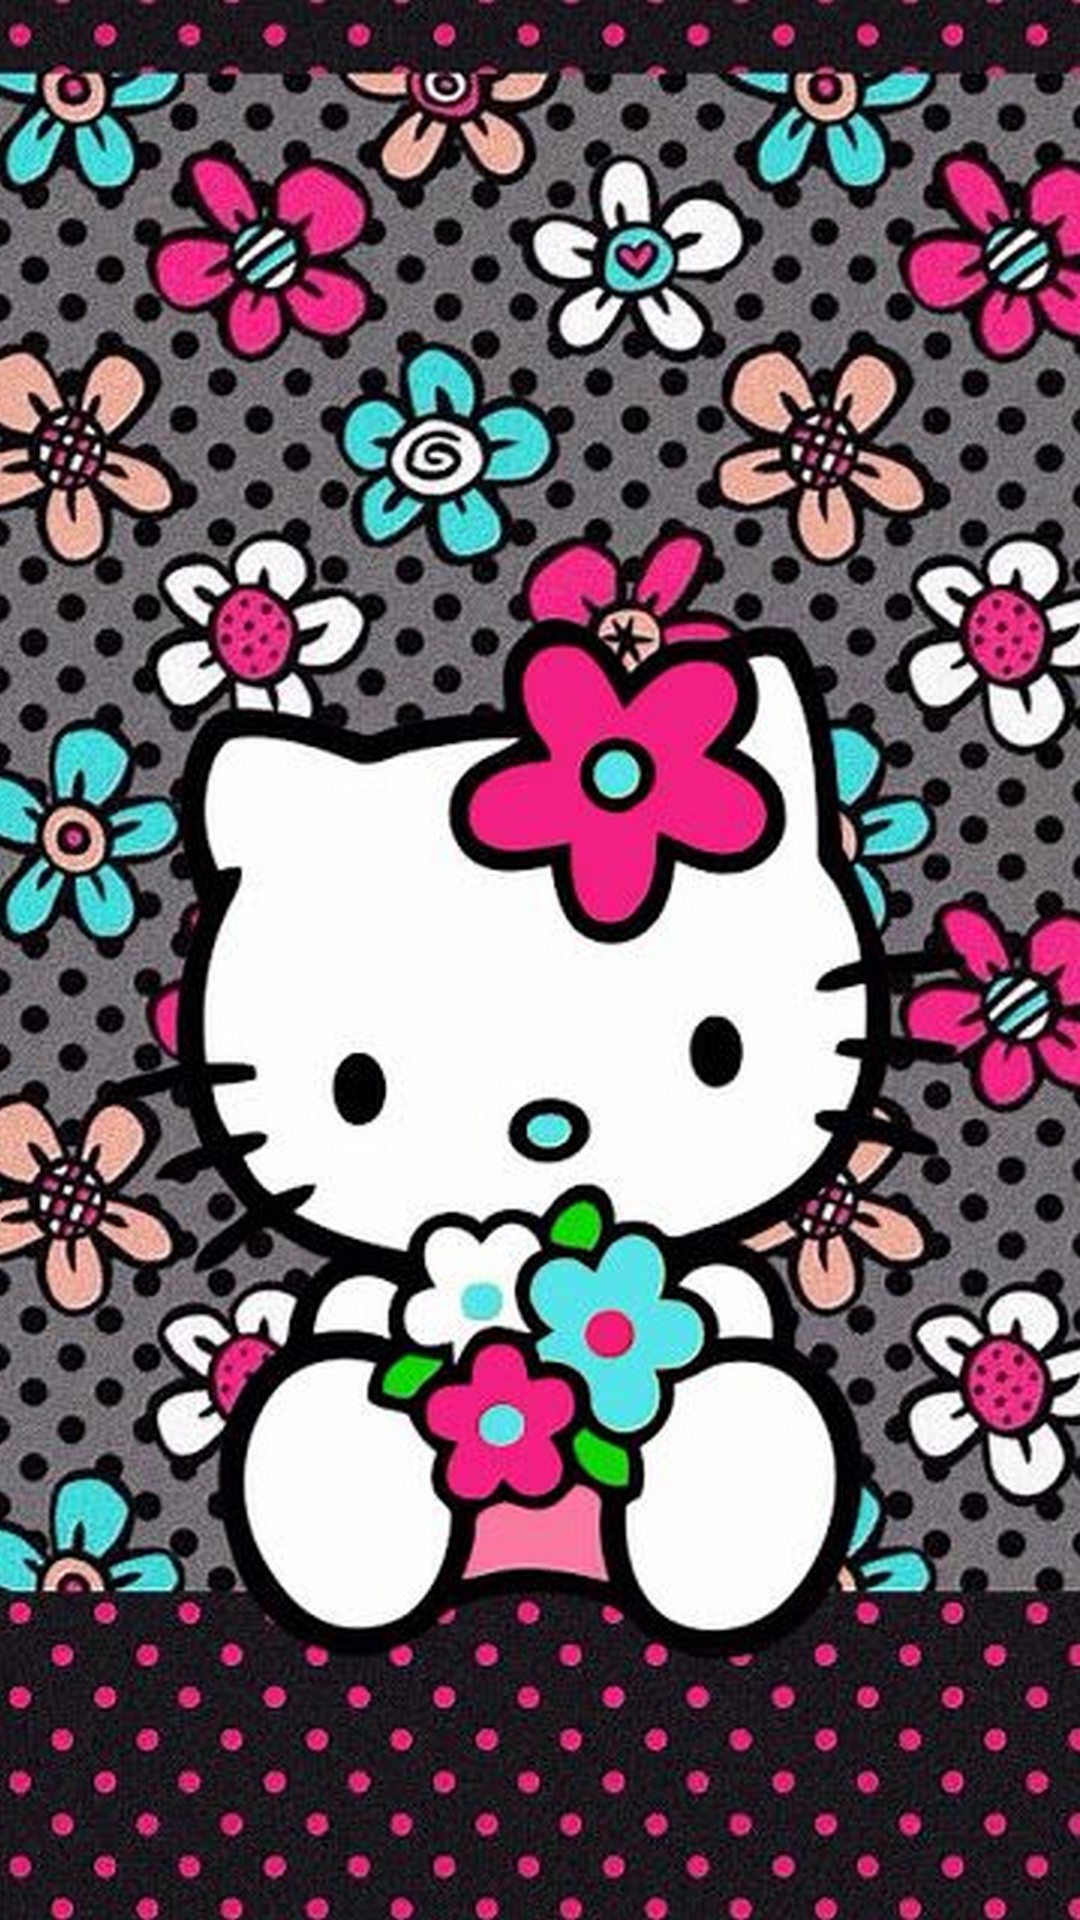 Wallpaper iPhone Hello Kitty Images with resolution 1080X1920 pixel. You can make this wallpaper for your iPhone 5, 6, 7, 8, X backgrounds, Mobile Screensaver, or iPad Lock Screen